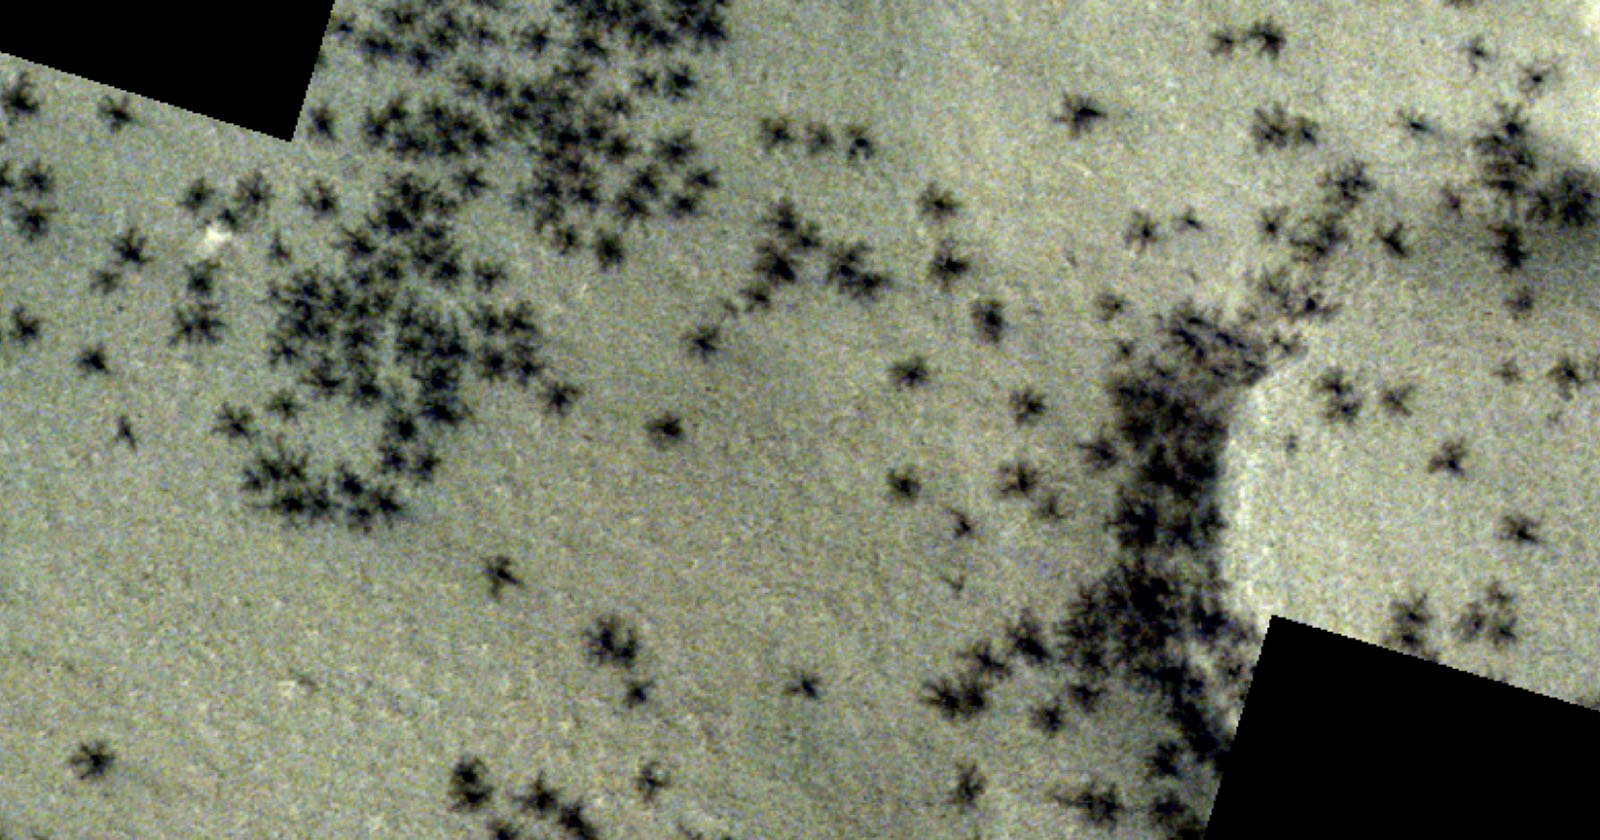 Satellite Photo Shows an Army of 'Black Spiders' on Mars - PetaPixel